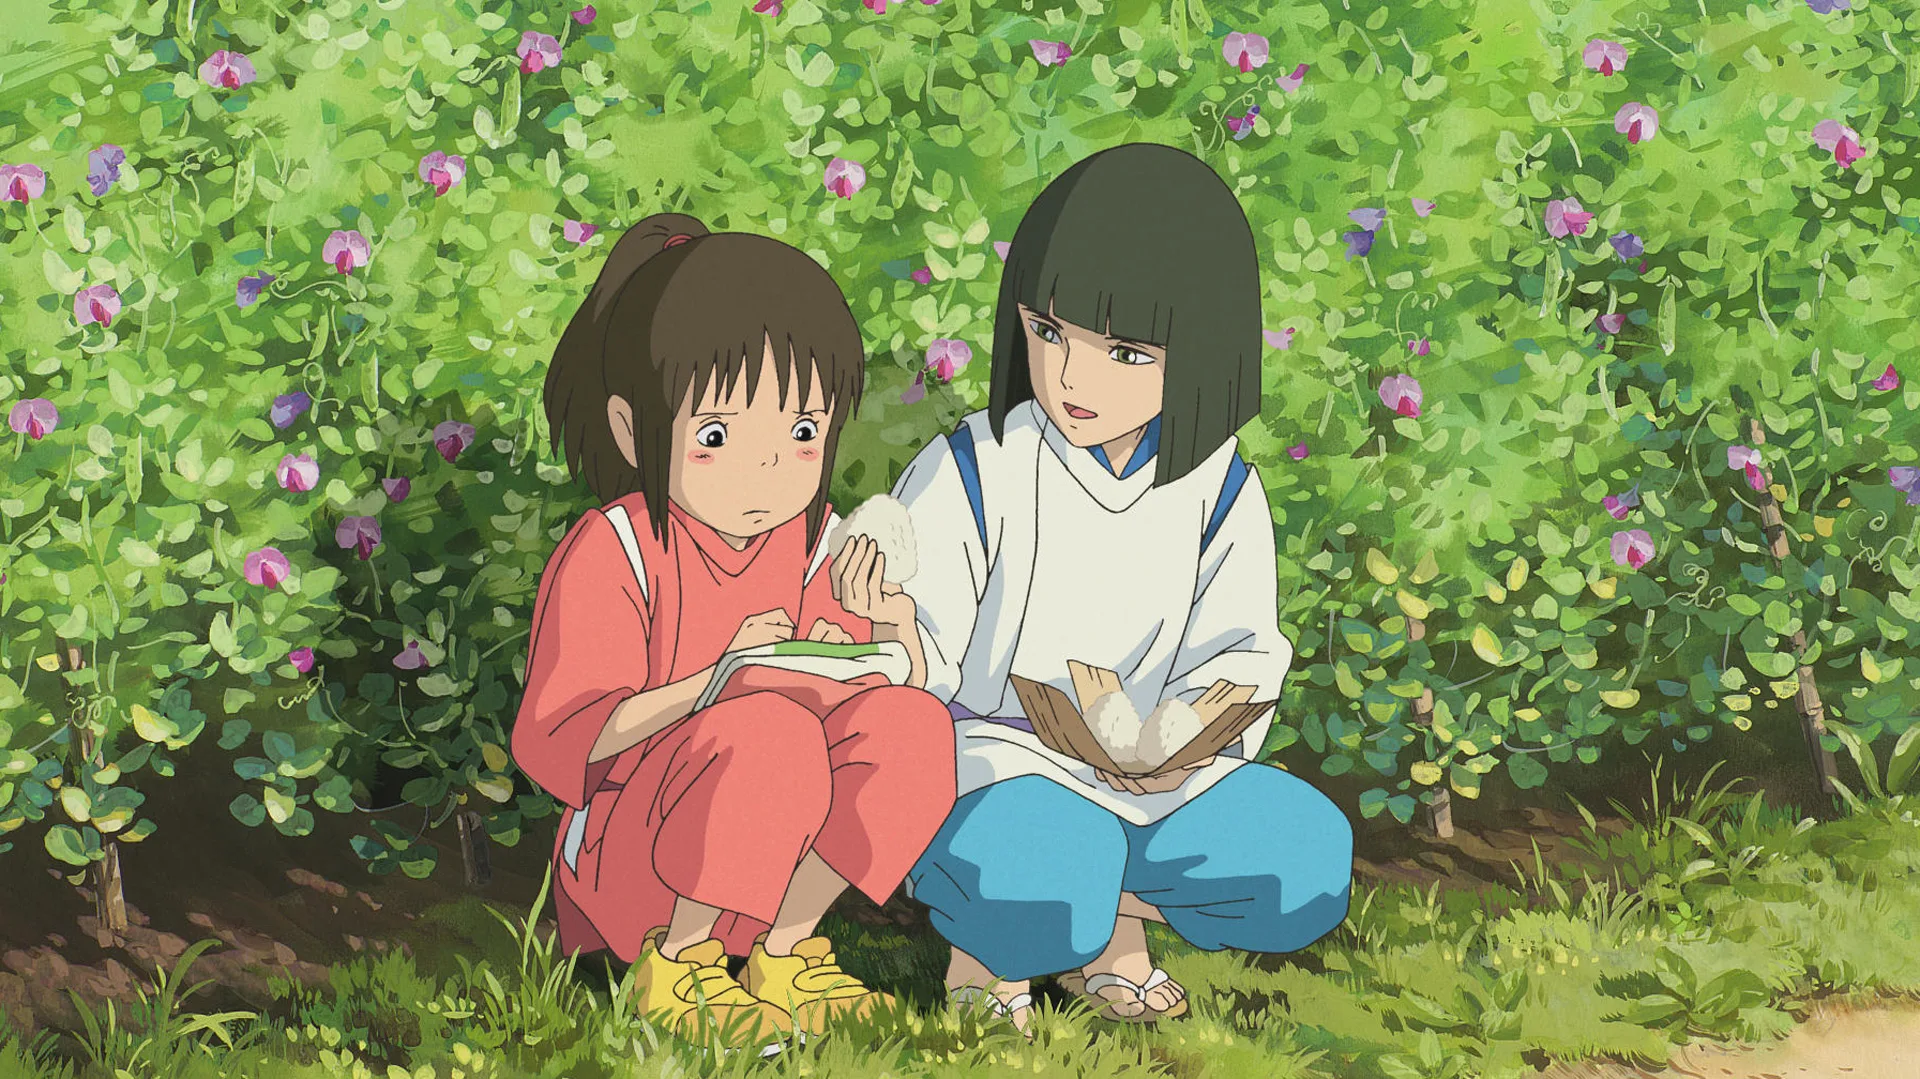 A still from Spirited Away showing Haku giving something to Chihiro against a bush